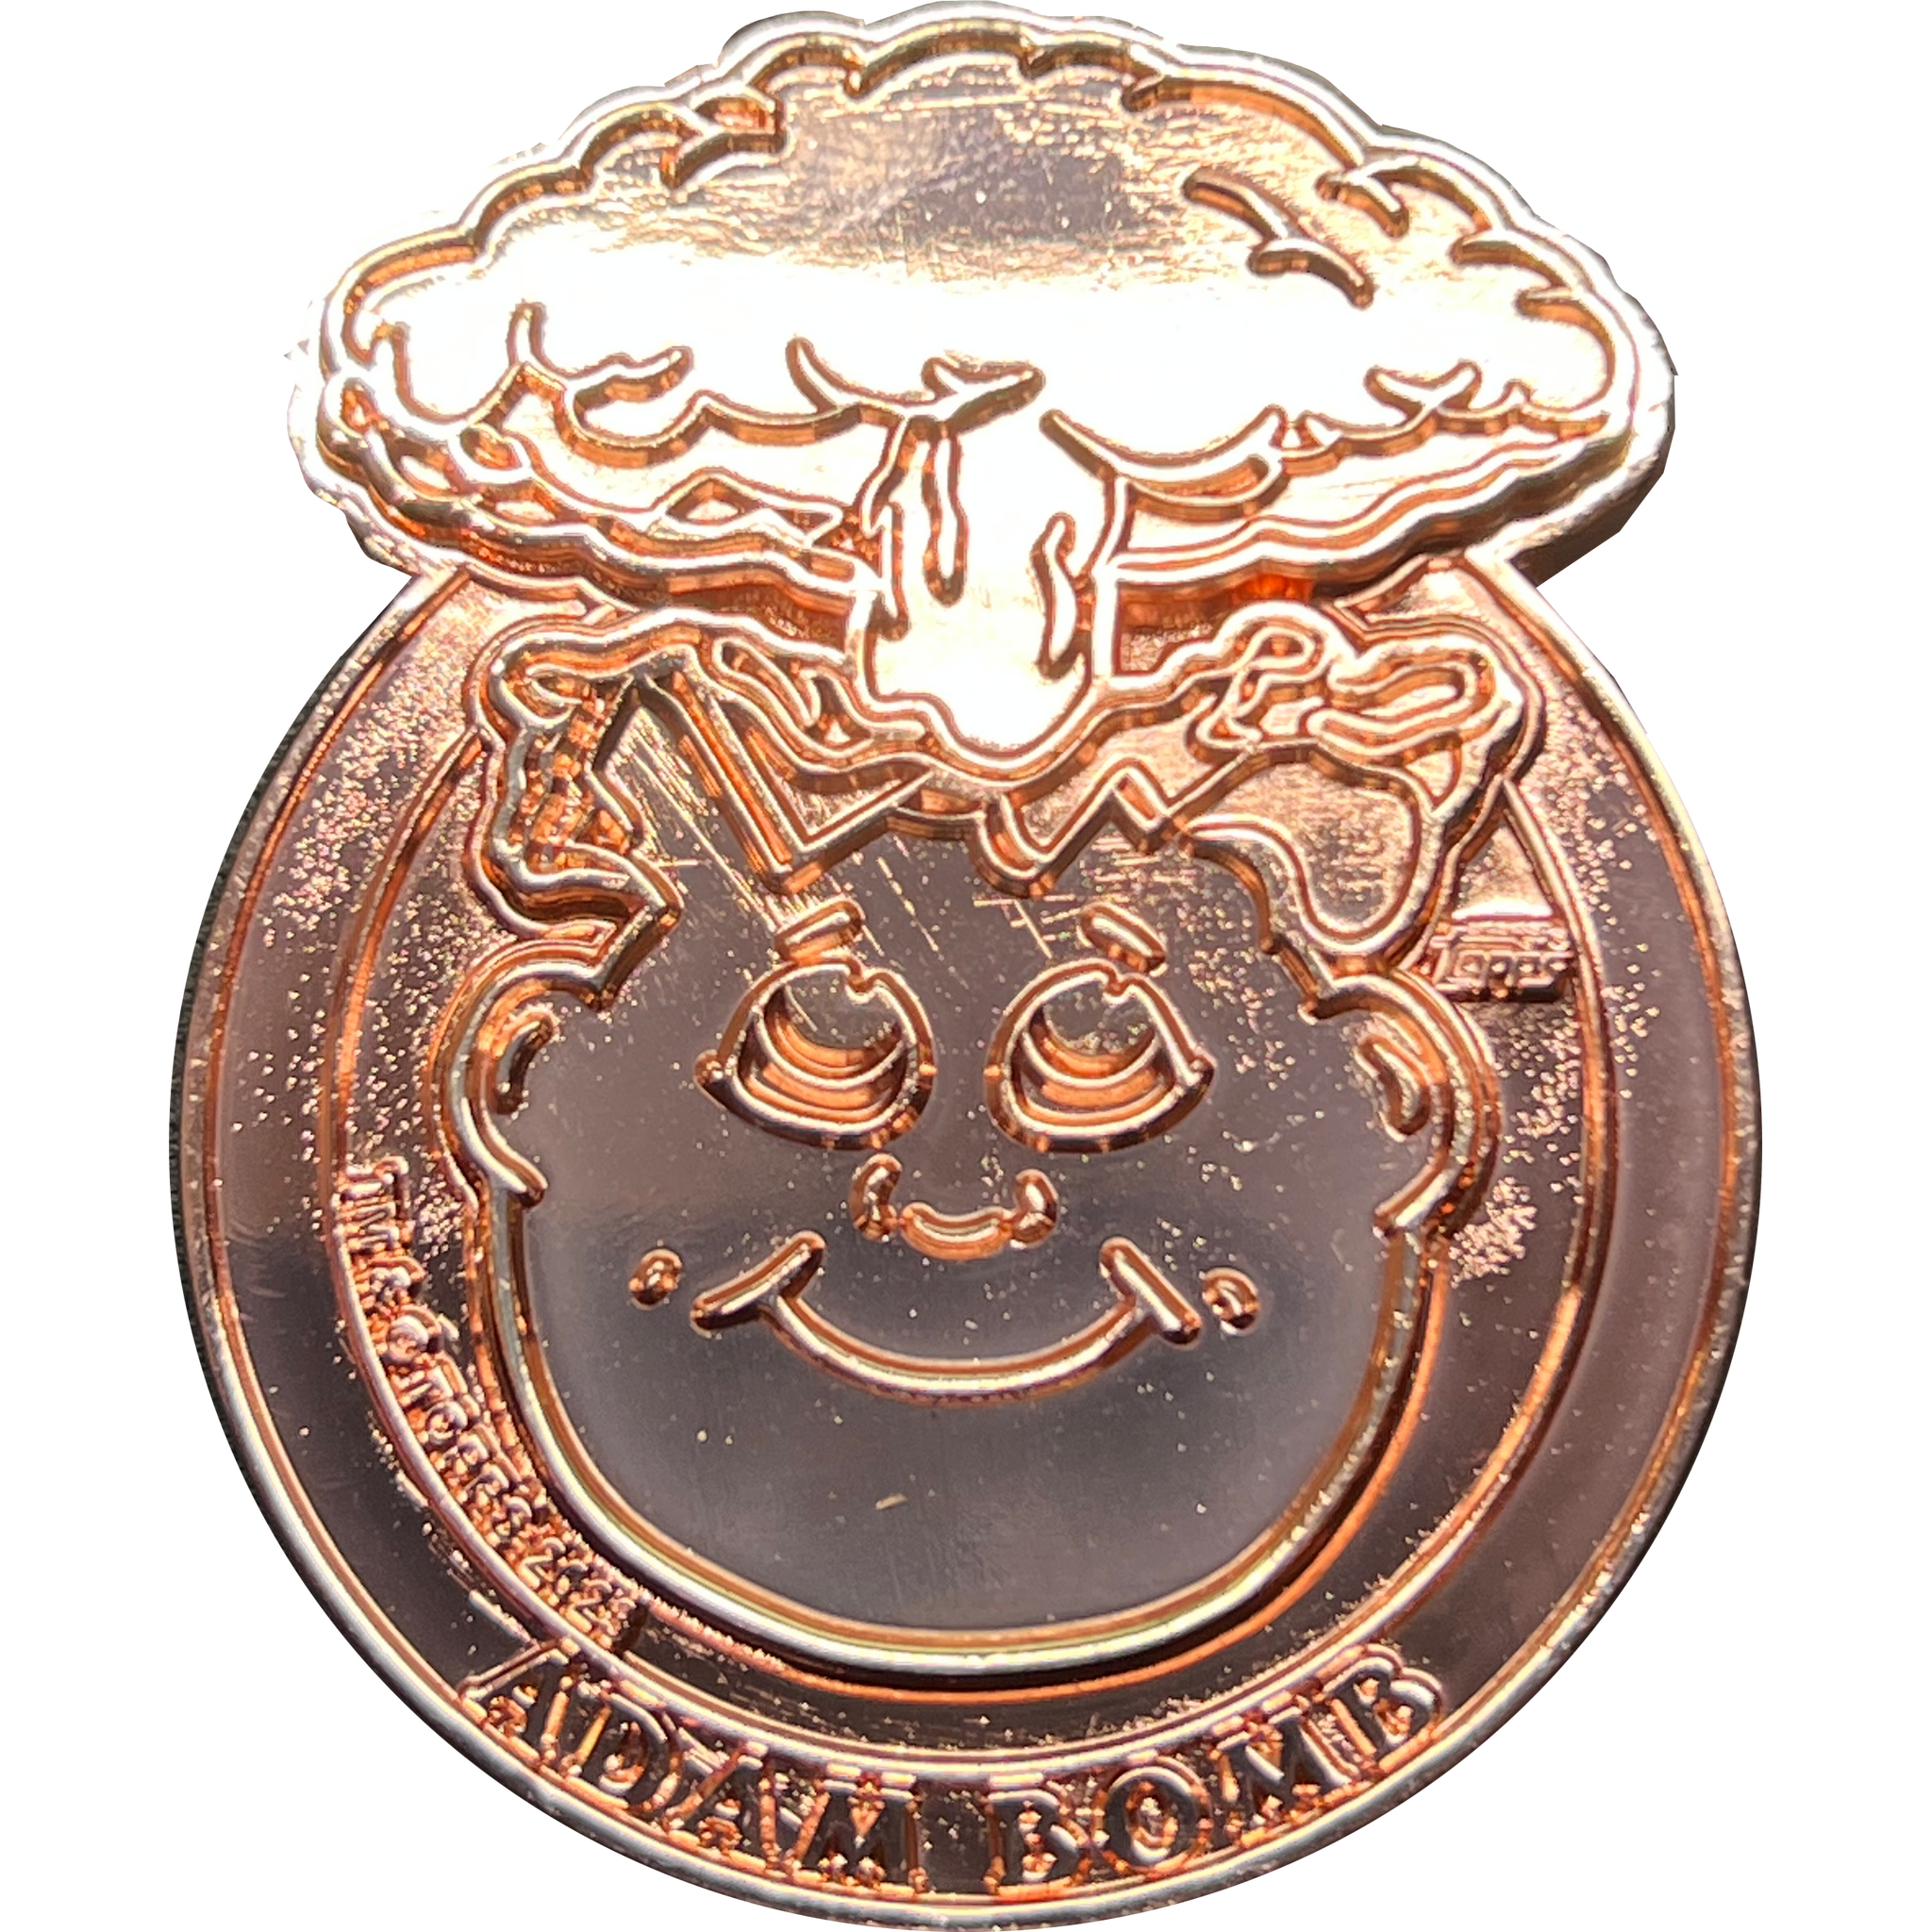 Rose Gold plated 3-piece Adam Bomb Challenge Coin limited to 15 pieces with individual serial number